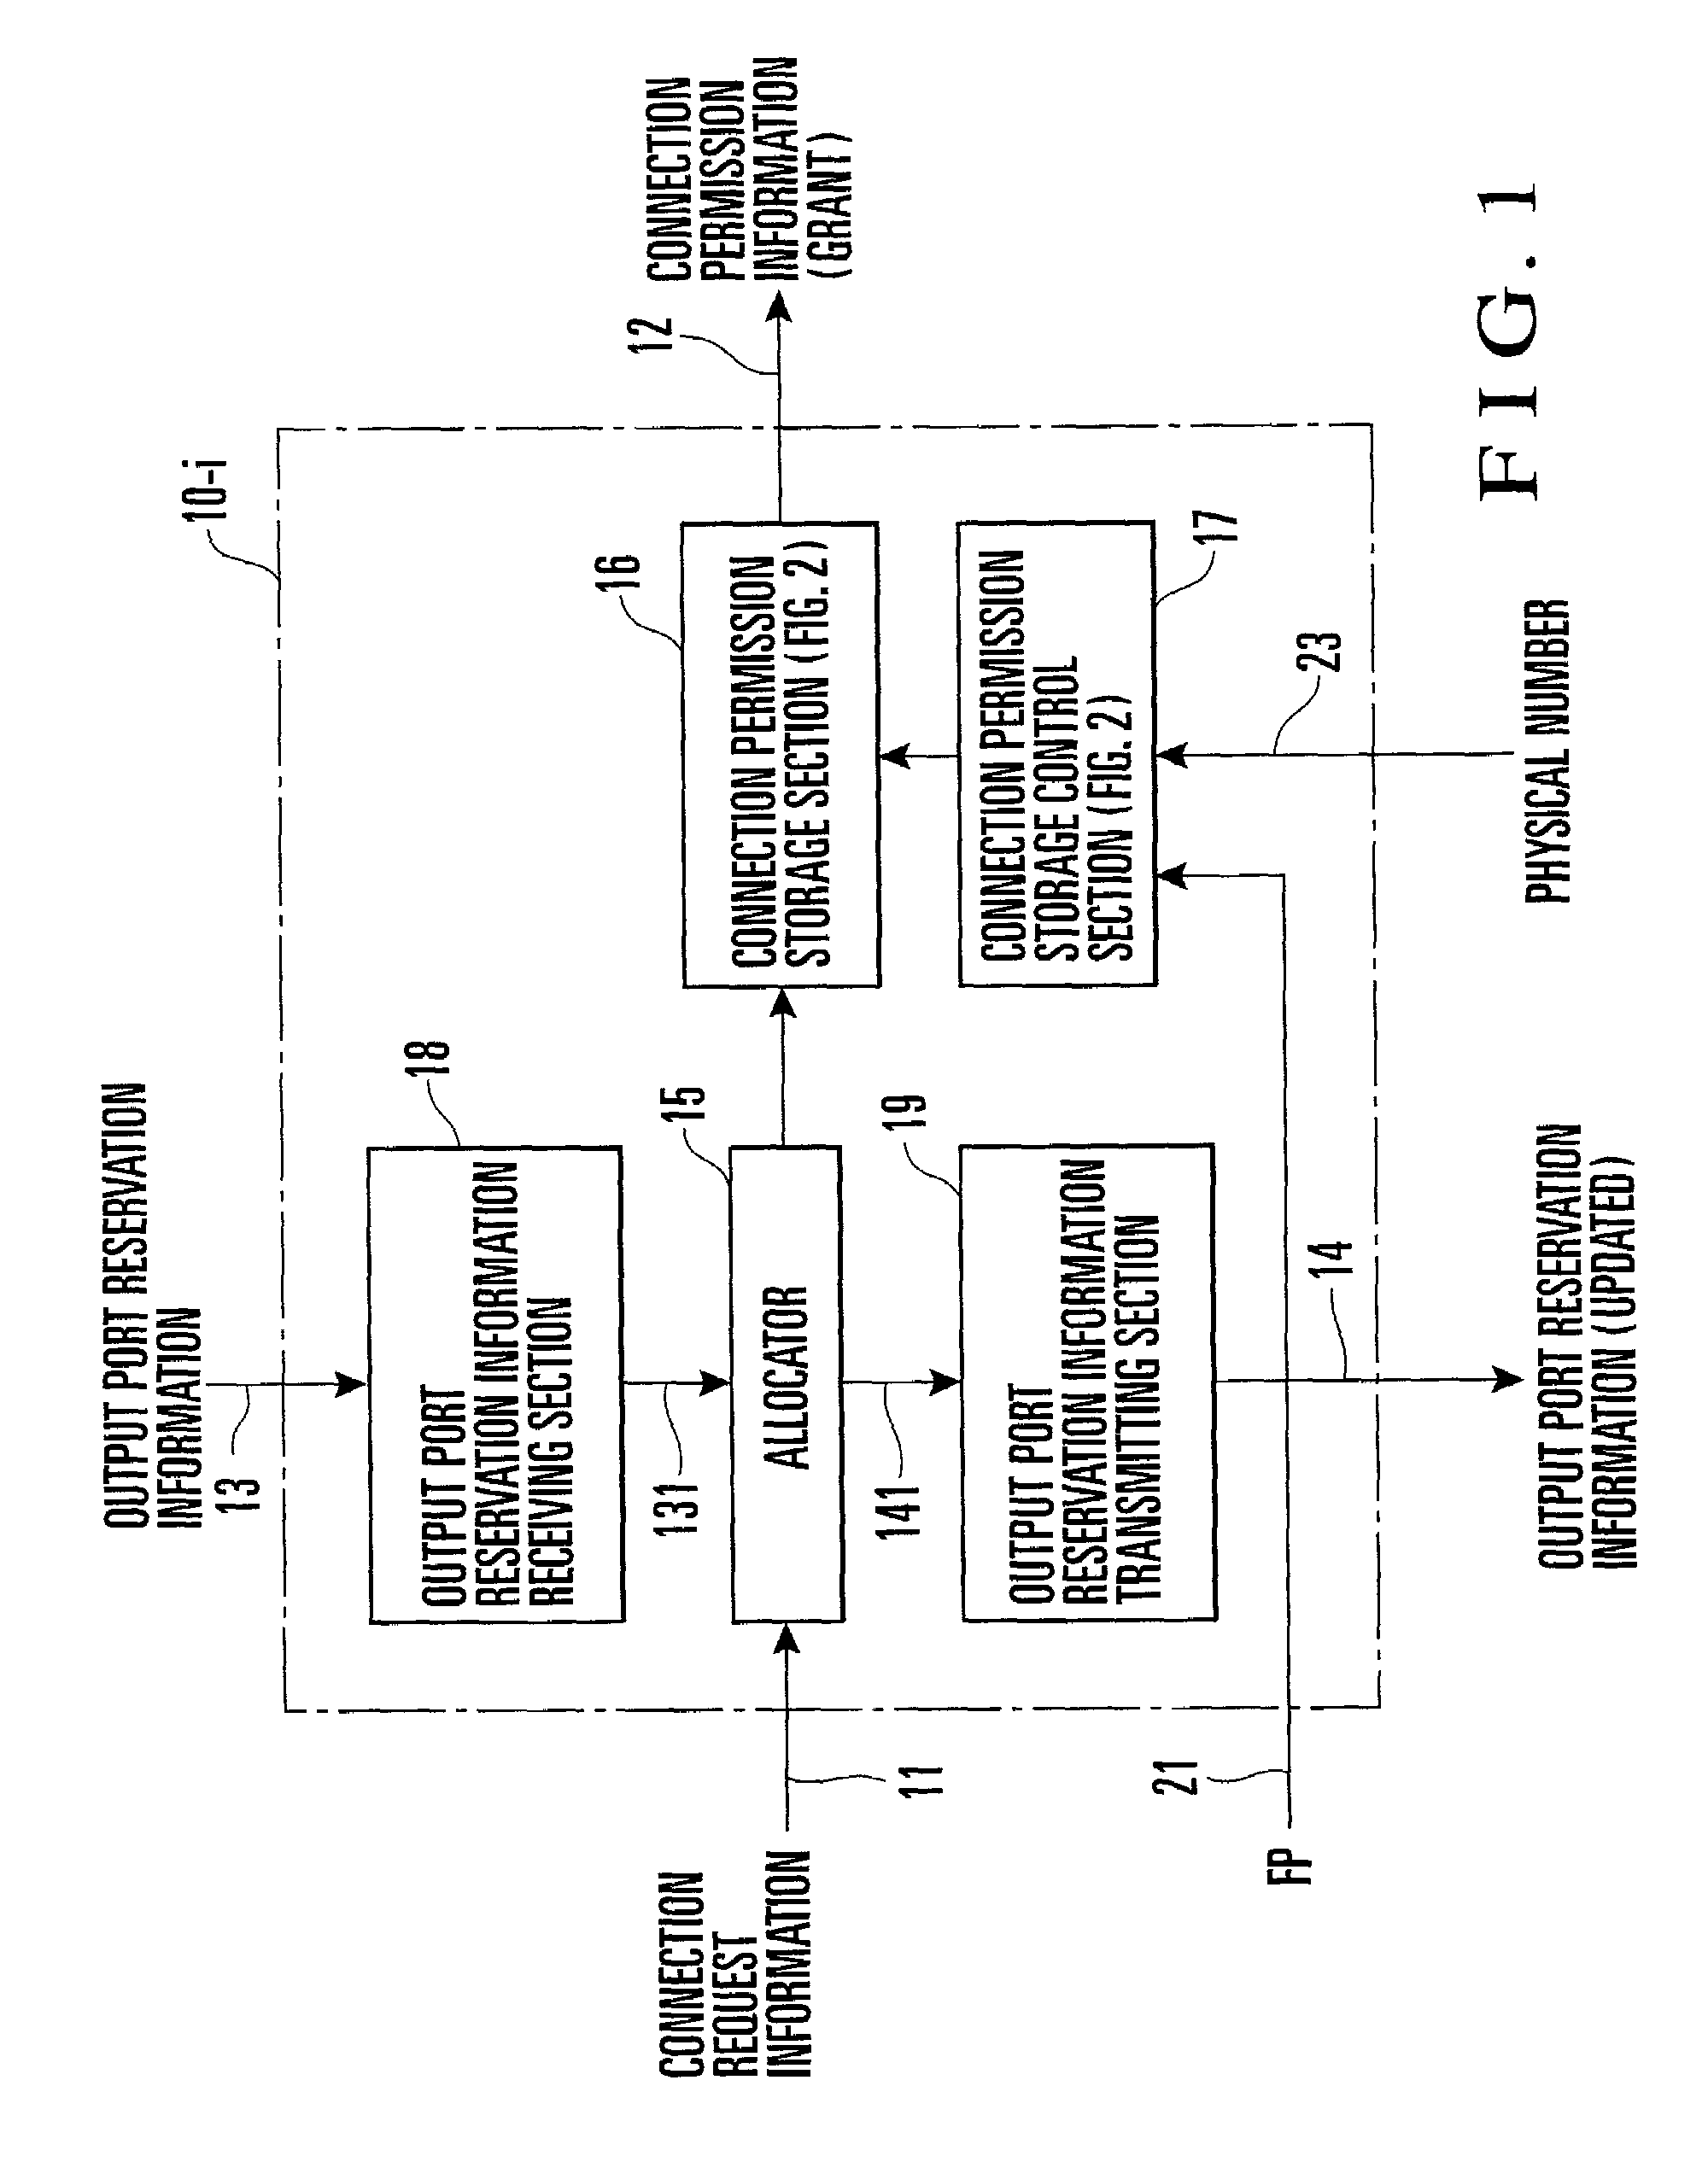 Distributed pipeline scheduling method and system